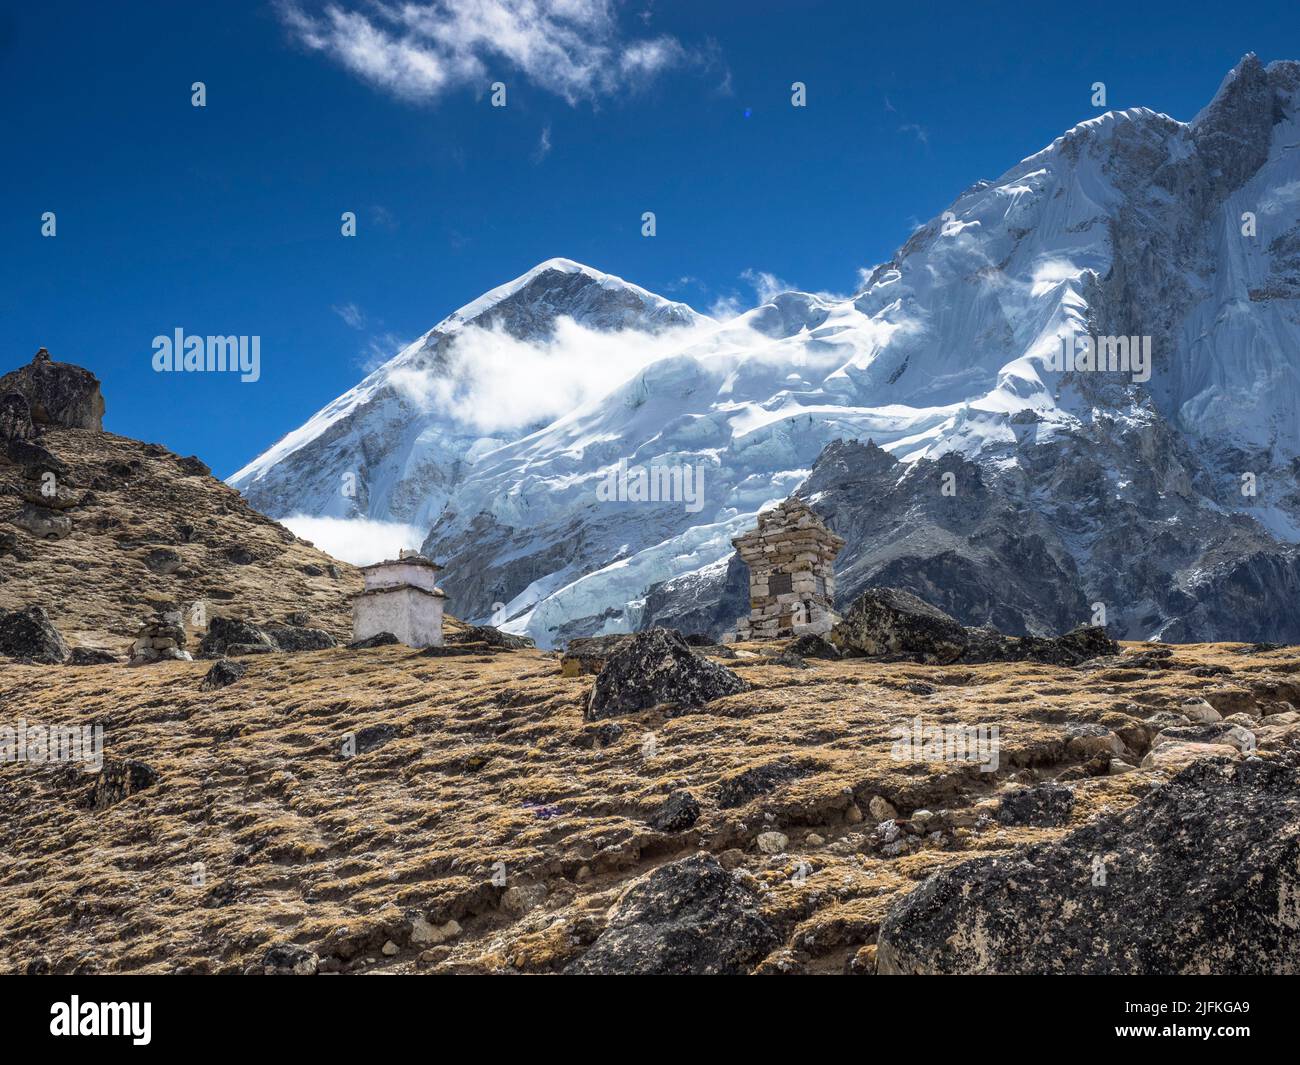 The West Shoulder of Everest from the small hill where the Adventure Consultants memorial chortens reside above Gorak Shep. Stock Photo